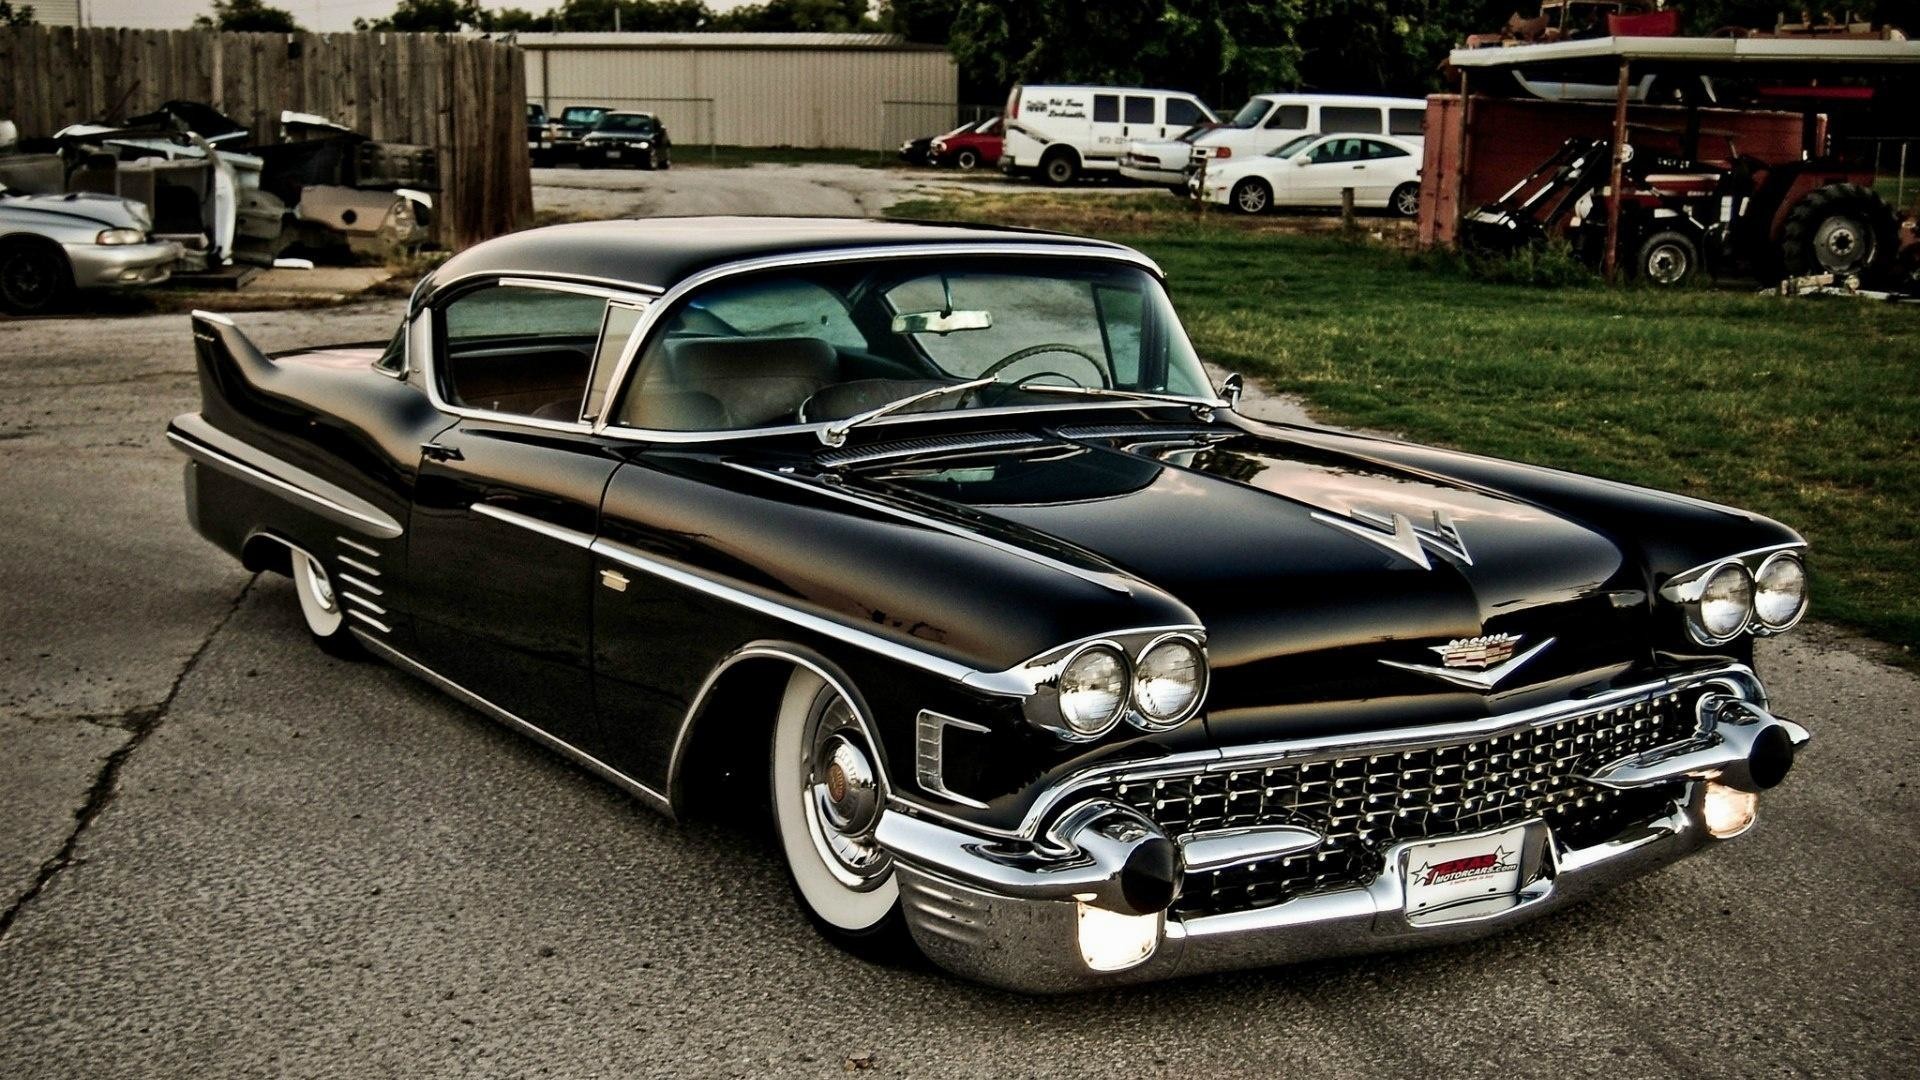 Free Lowrider Car Wallpaper For Pc Wtg2004558 
 Data - Cadillac Deville Coupe 1956 - HD Wallpaper 